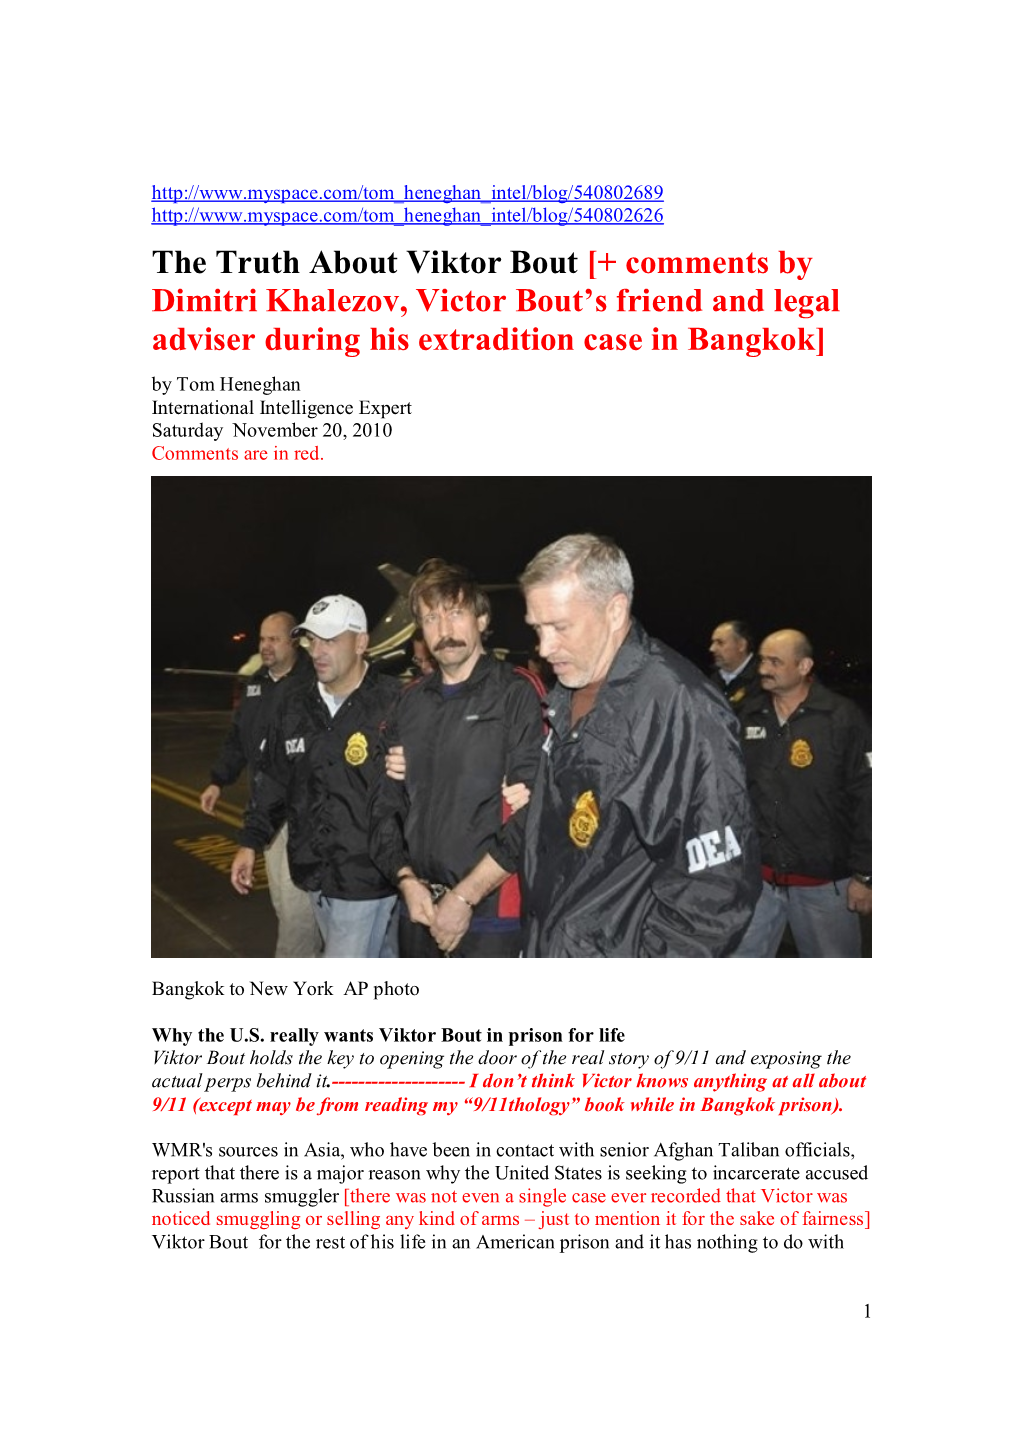 BREAKING the Truth About Viktor Bout and BREAKING the Lie About